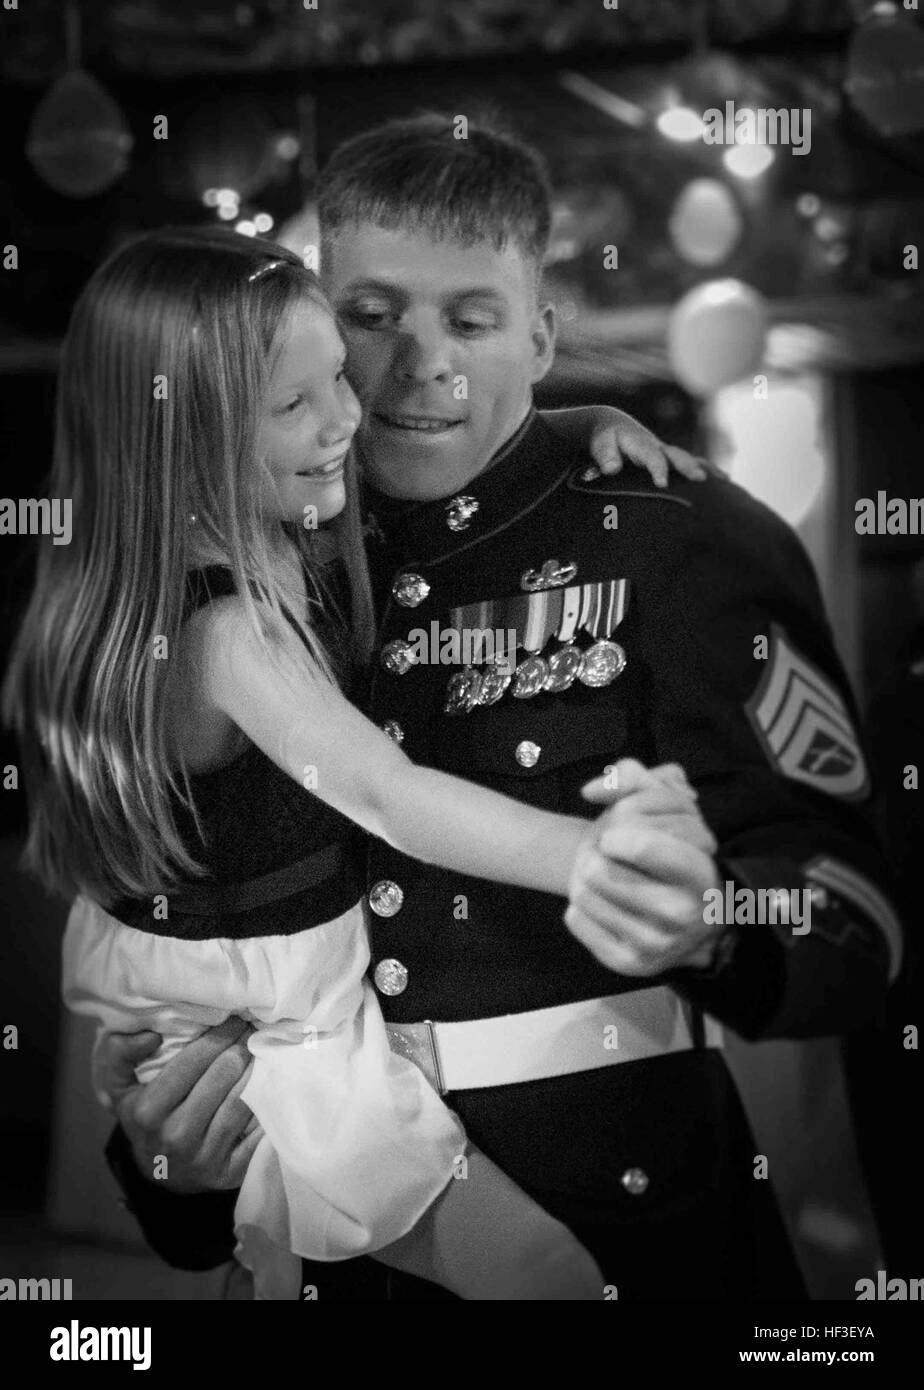 Staff Sgt. Steven Smith shares a moment with his daughter at the Father Daughter Dance hosted by 1st Battalion, 3rd Marine Regiment and the Armed Services YMCA at the Officer's Club, June 27, 2015. The event stressed the importance of a father-daughter relationship and gave them an opportunity to spend quality time together. (U.S. Marine Corps photo by Cpl. Brittney Vito/Released) Daddies, Daughters Dance Night Away 150627-M-TM809-286 Stock Photo